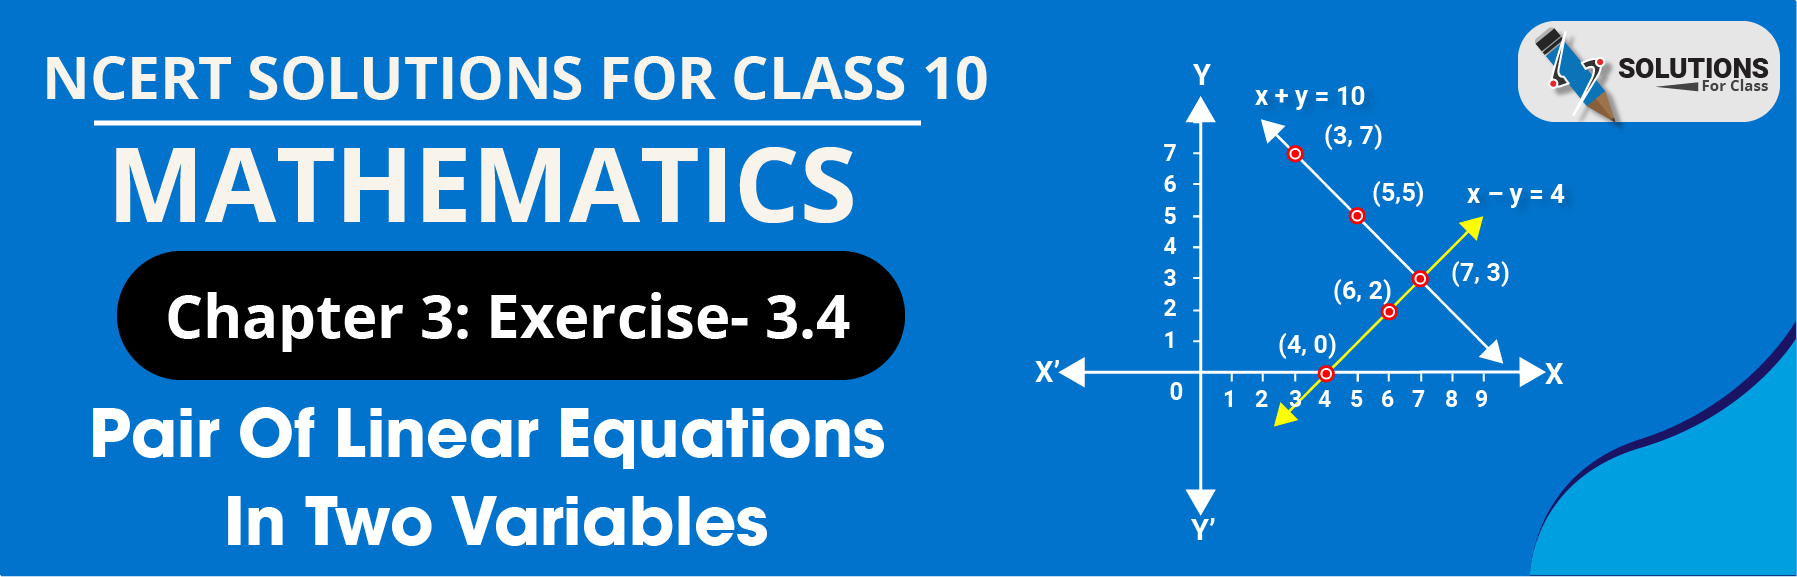 NCERT Solution For Class 10, Maths, Pair Of Linear Equations In Two Variables, Exercise 3.4